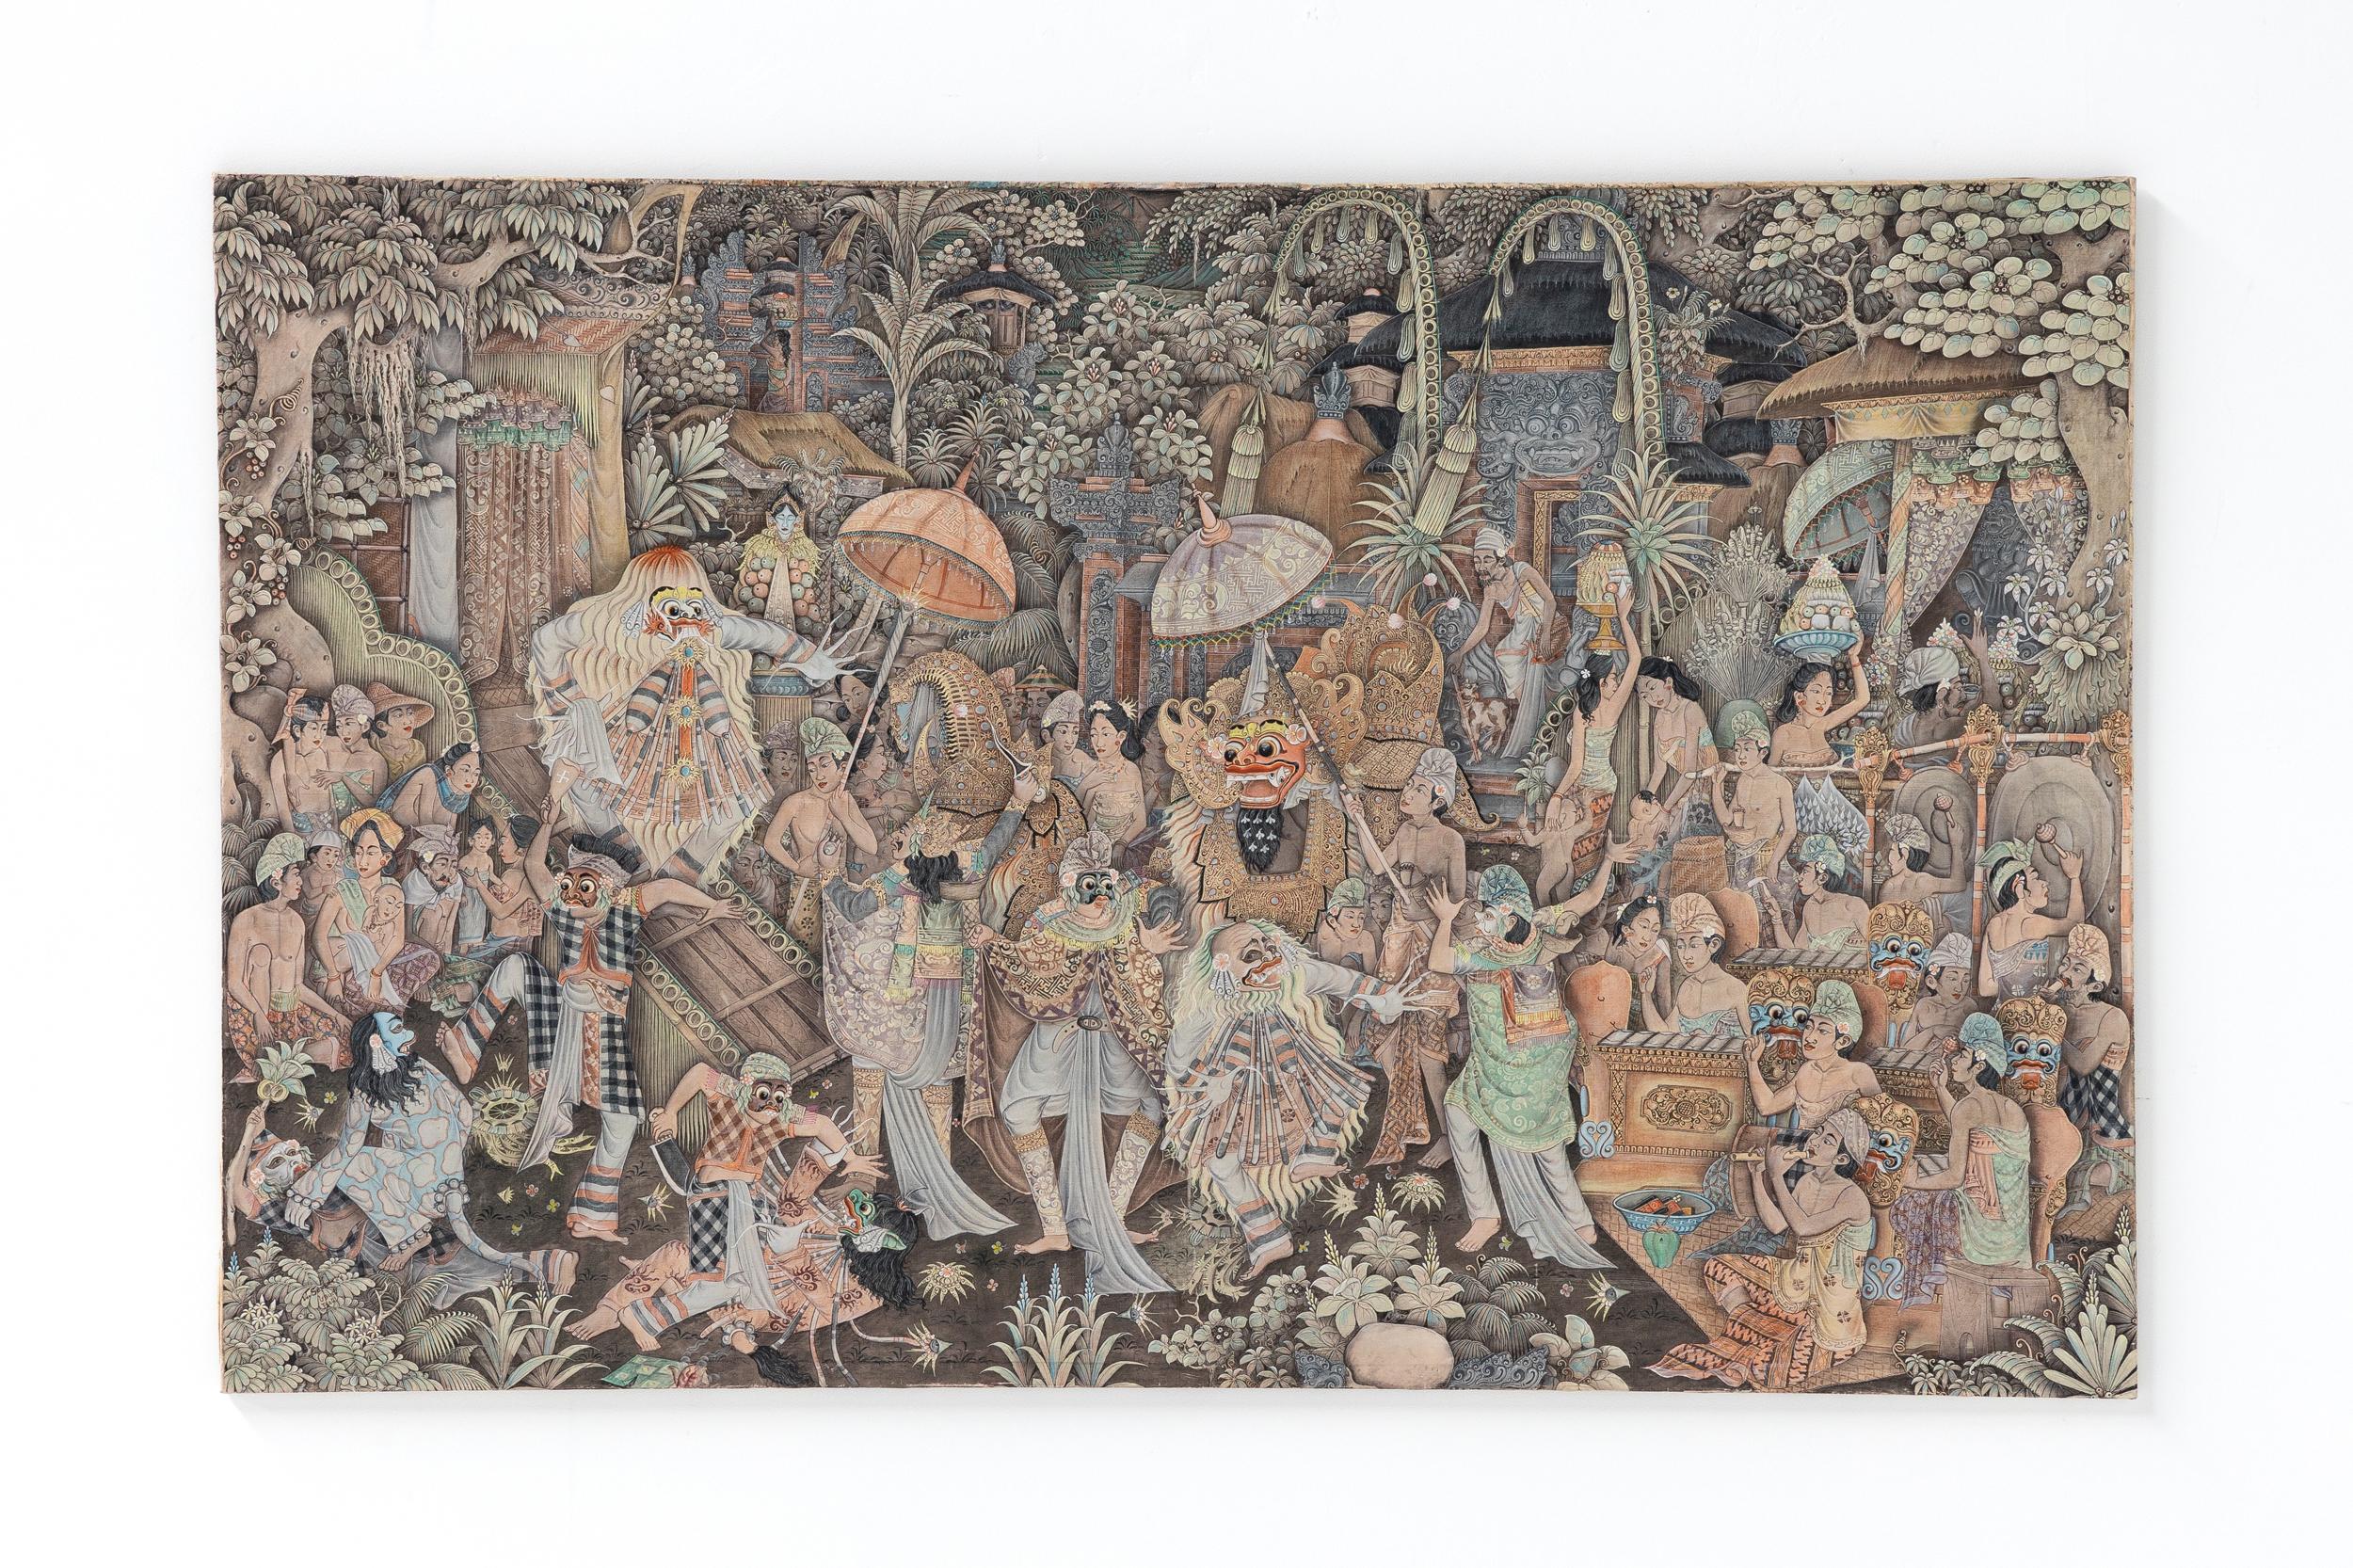 Balinese Painting; Artwork; 1980s; Balinese Art; Bali; Folk Art; 

Balinese painting, dating from the 1980s. Balinese art has traditionally called upon religion (Hinduism), people, and the island itself. Bali’s art evolved through the years,